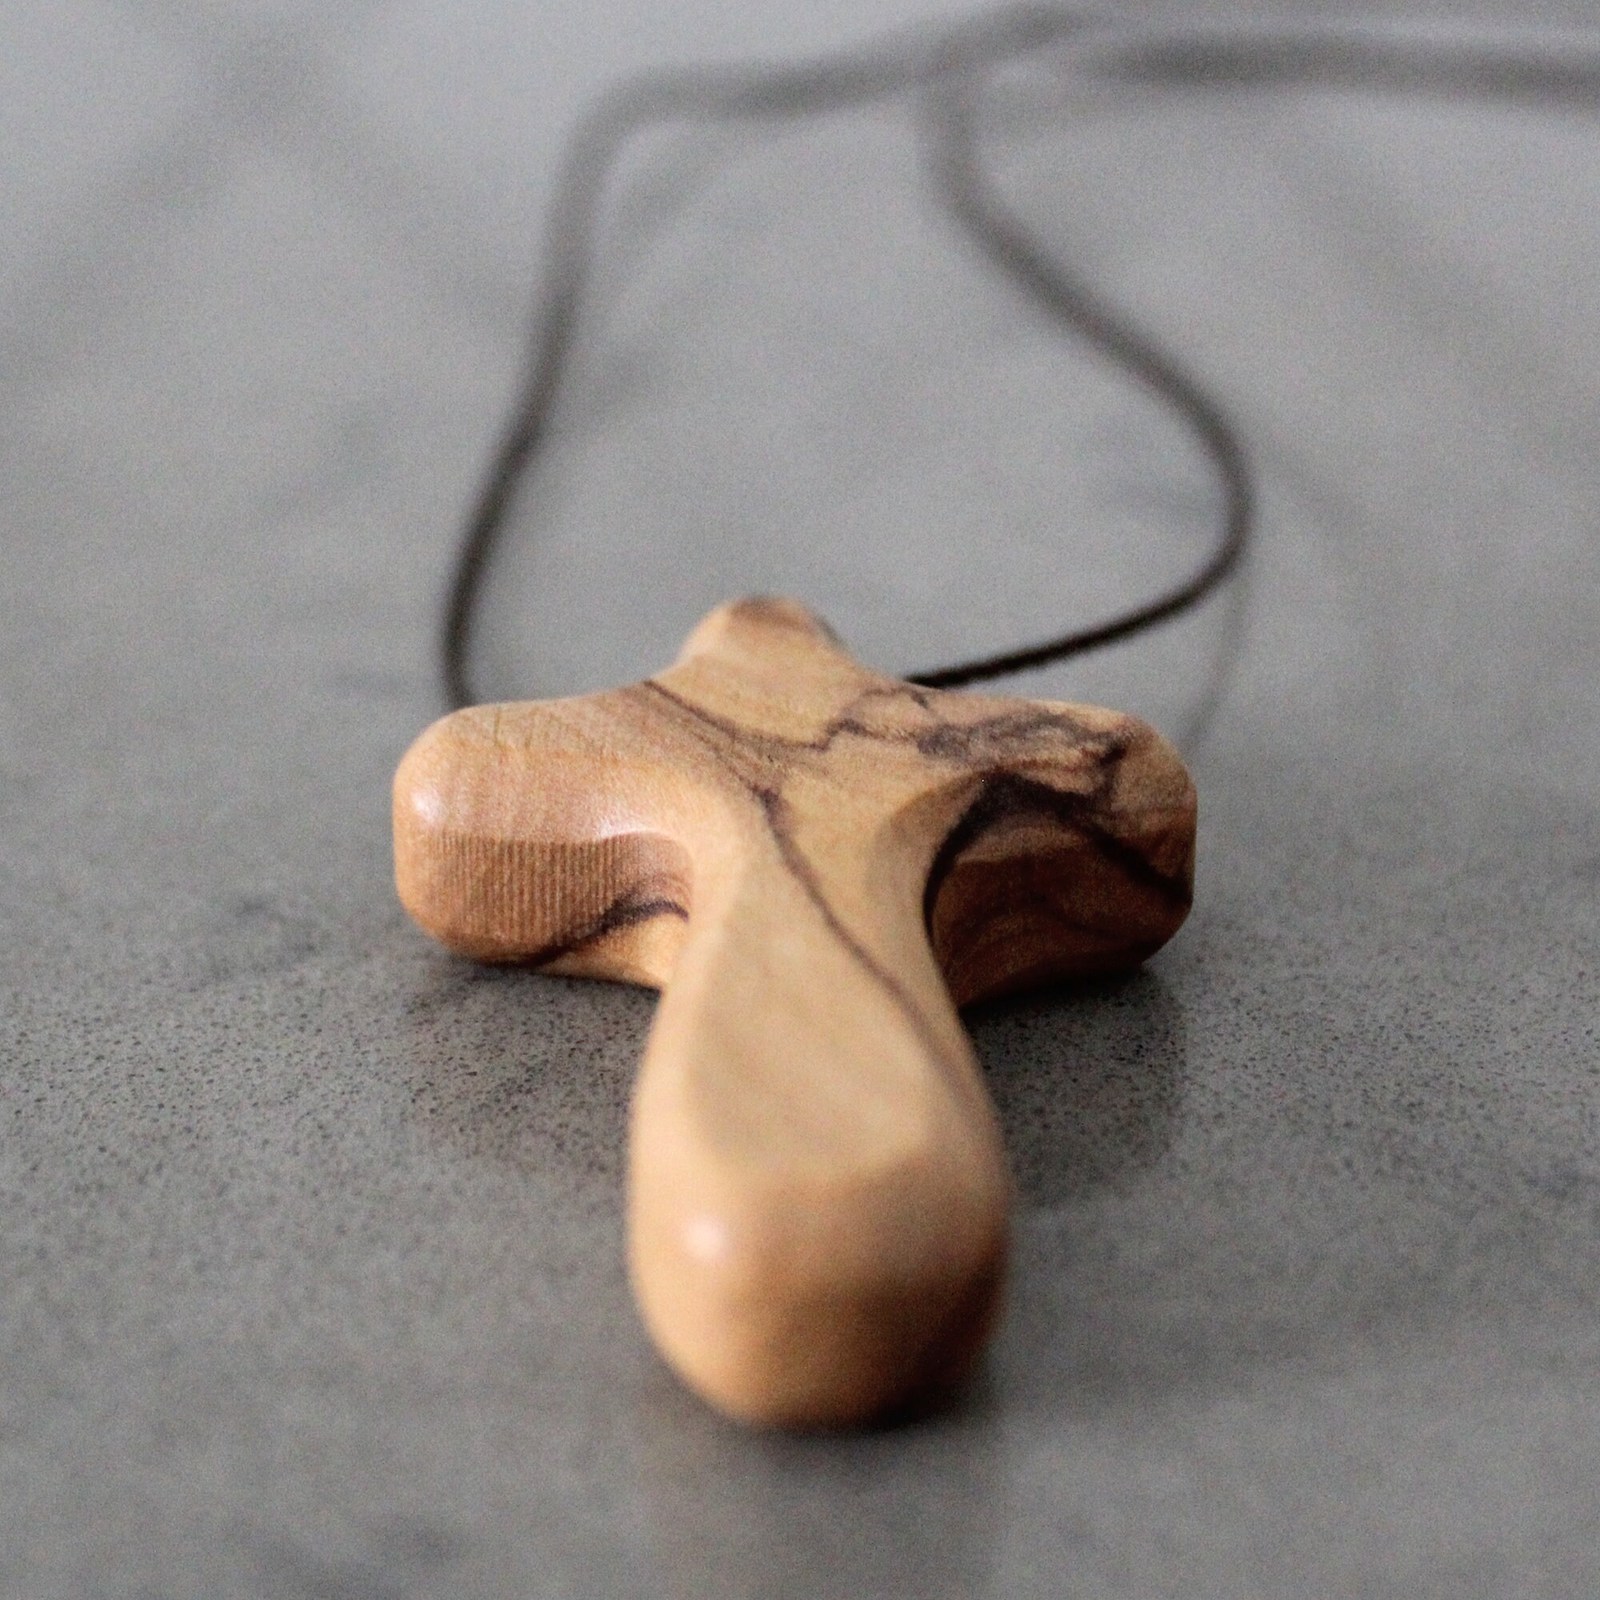 Primary image for 3" Comfort Cross With String, Olive Wood Cross Hand Crafted in Jerusalem, the Ho